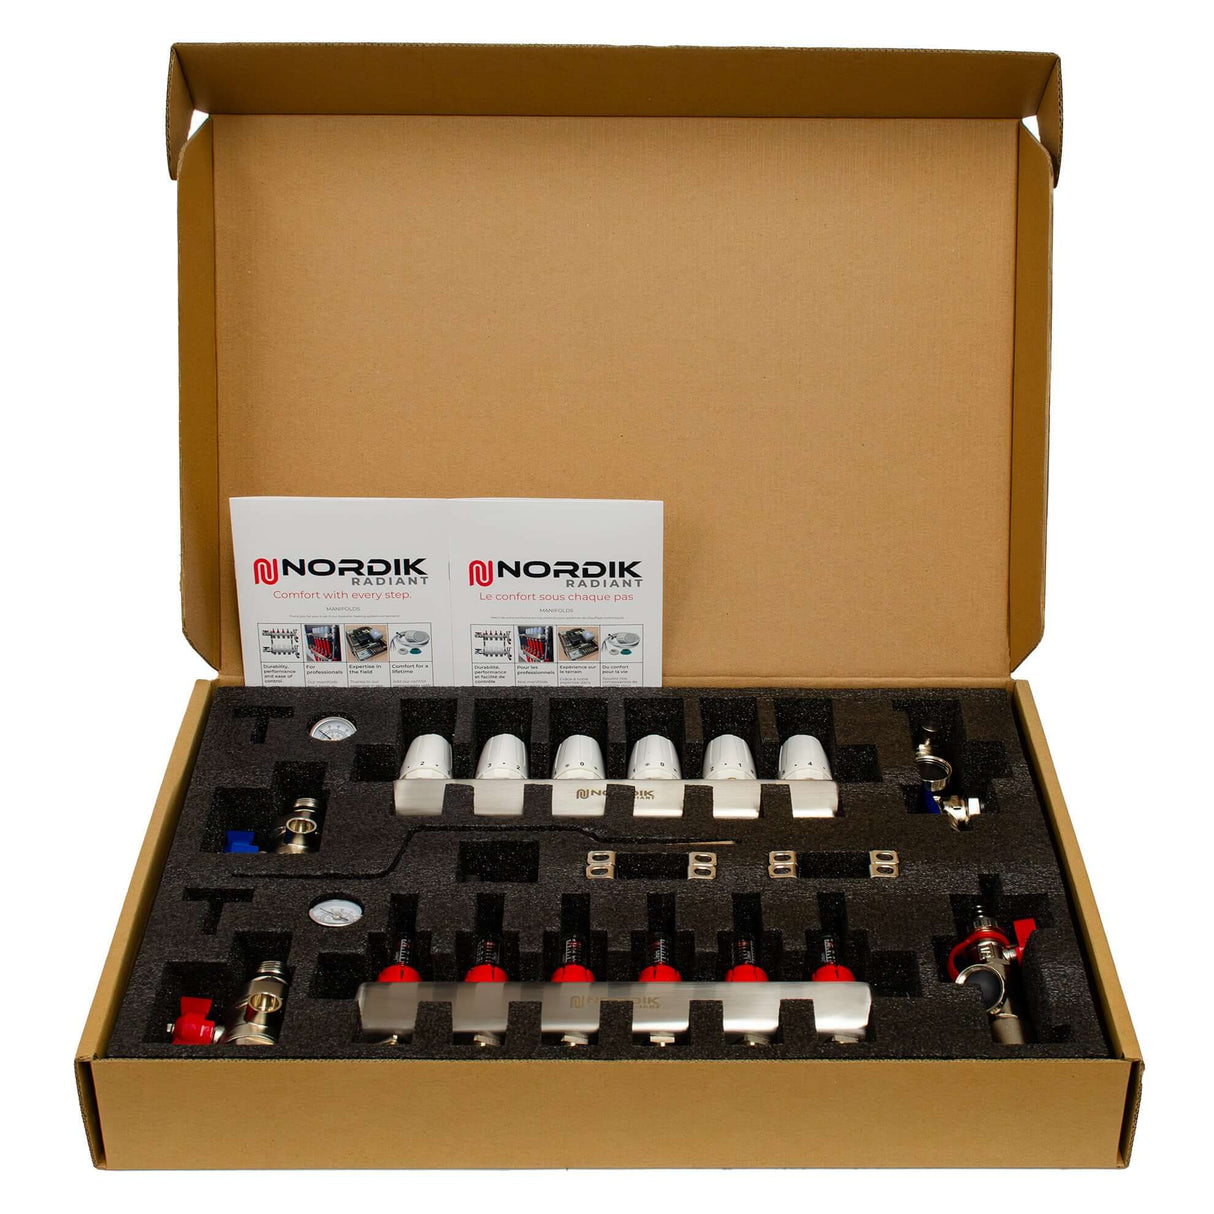 Nordik Radiant in-floor water and glycol hydronic radiant floor manifold - 6 loops inside the box